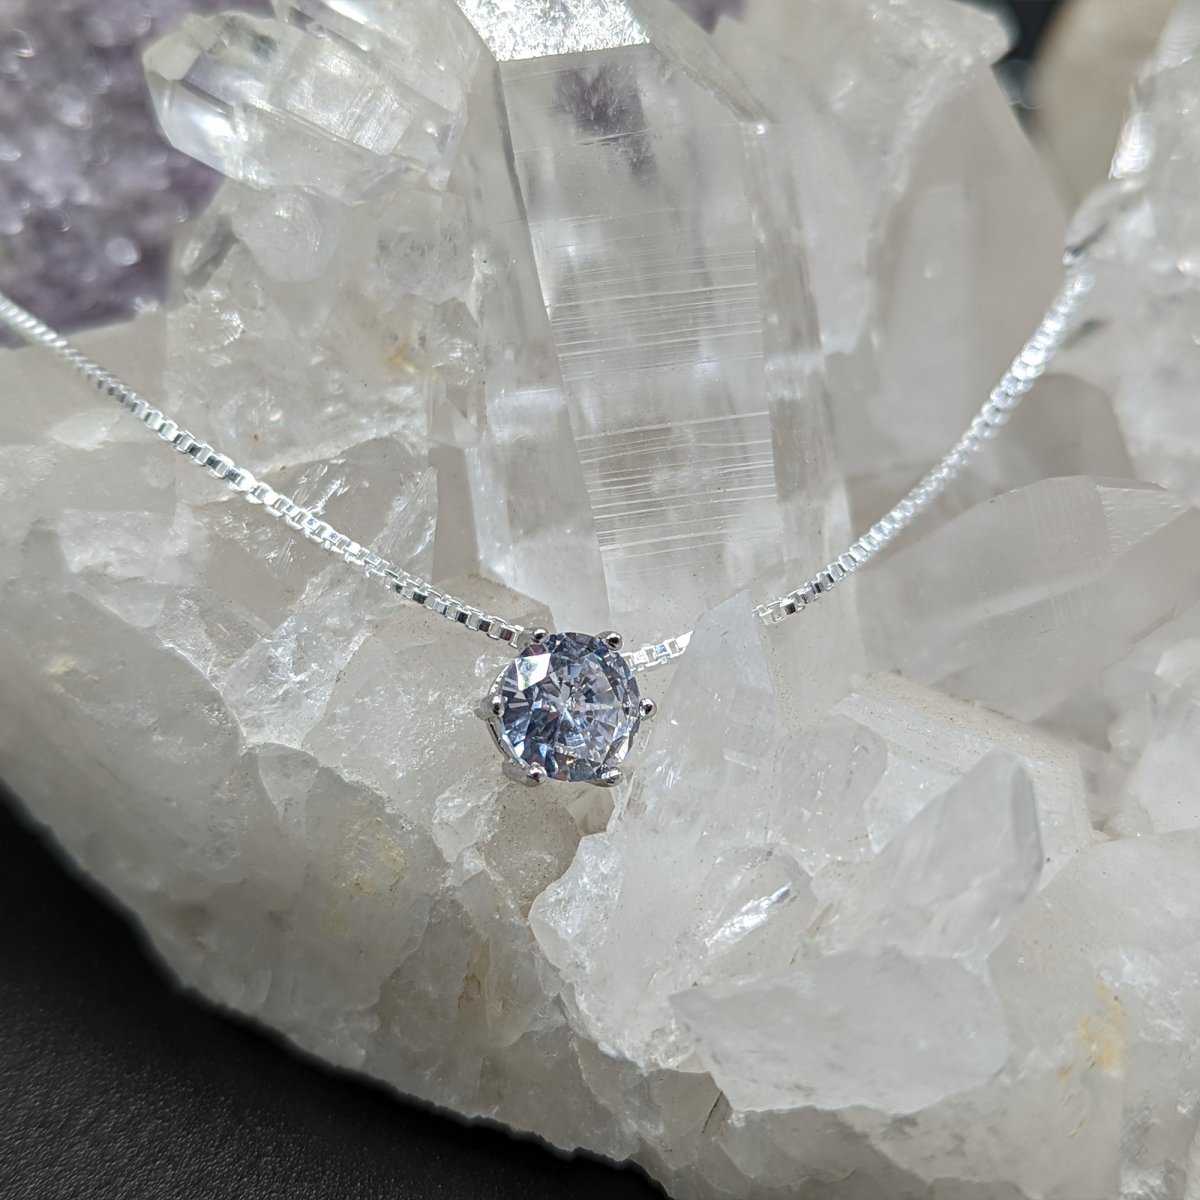 Gift for Daughter - Dainty CZ Sterling Silver Necklace - Meaningful Cards